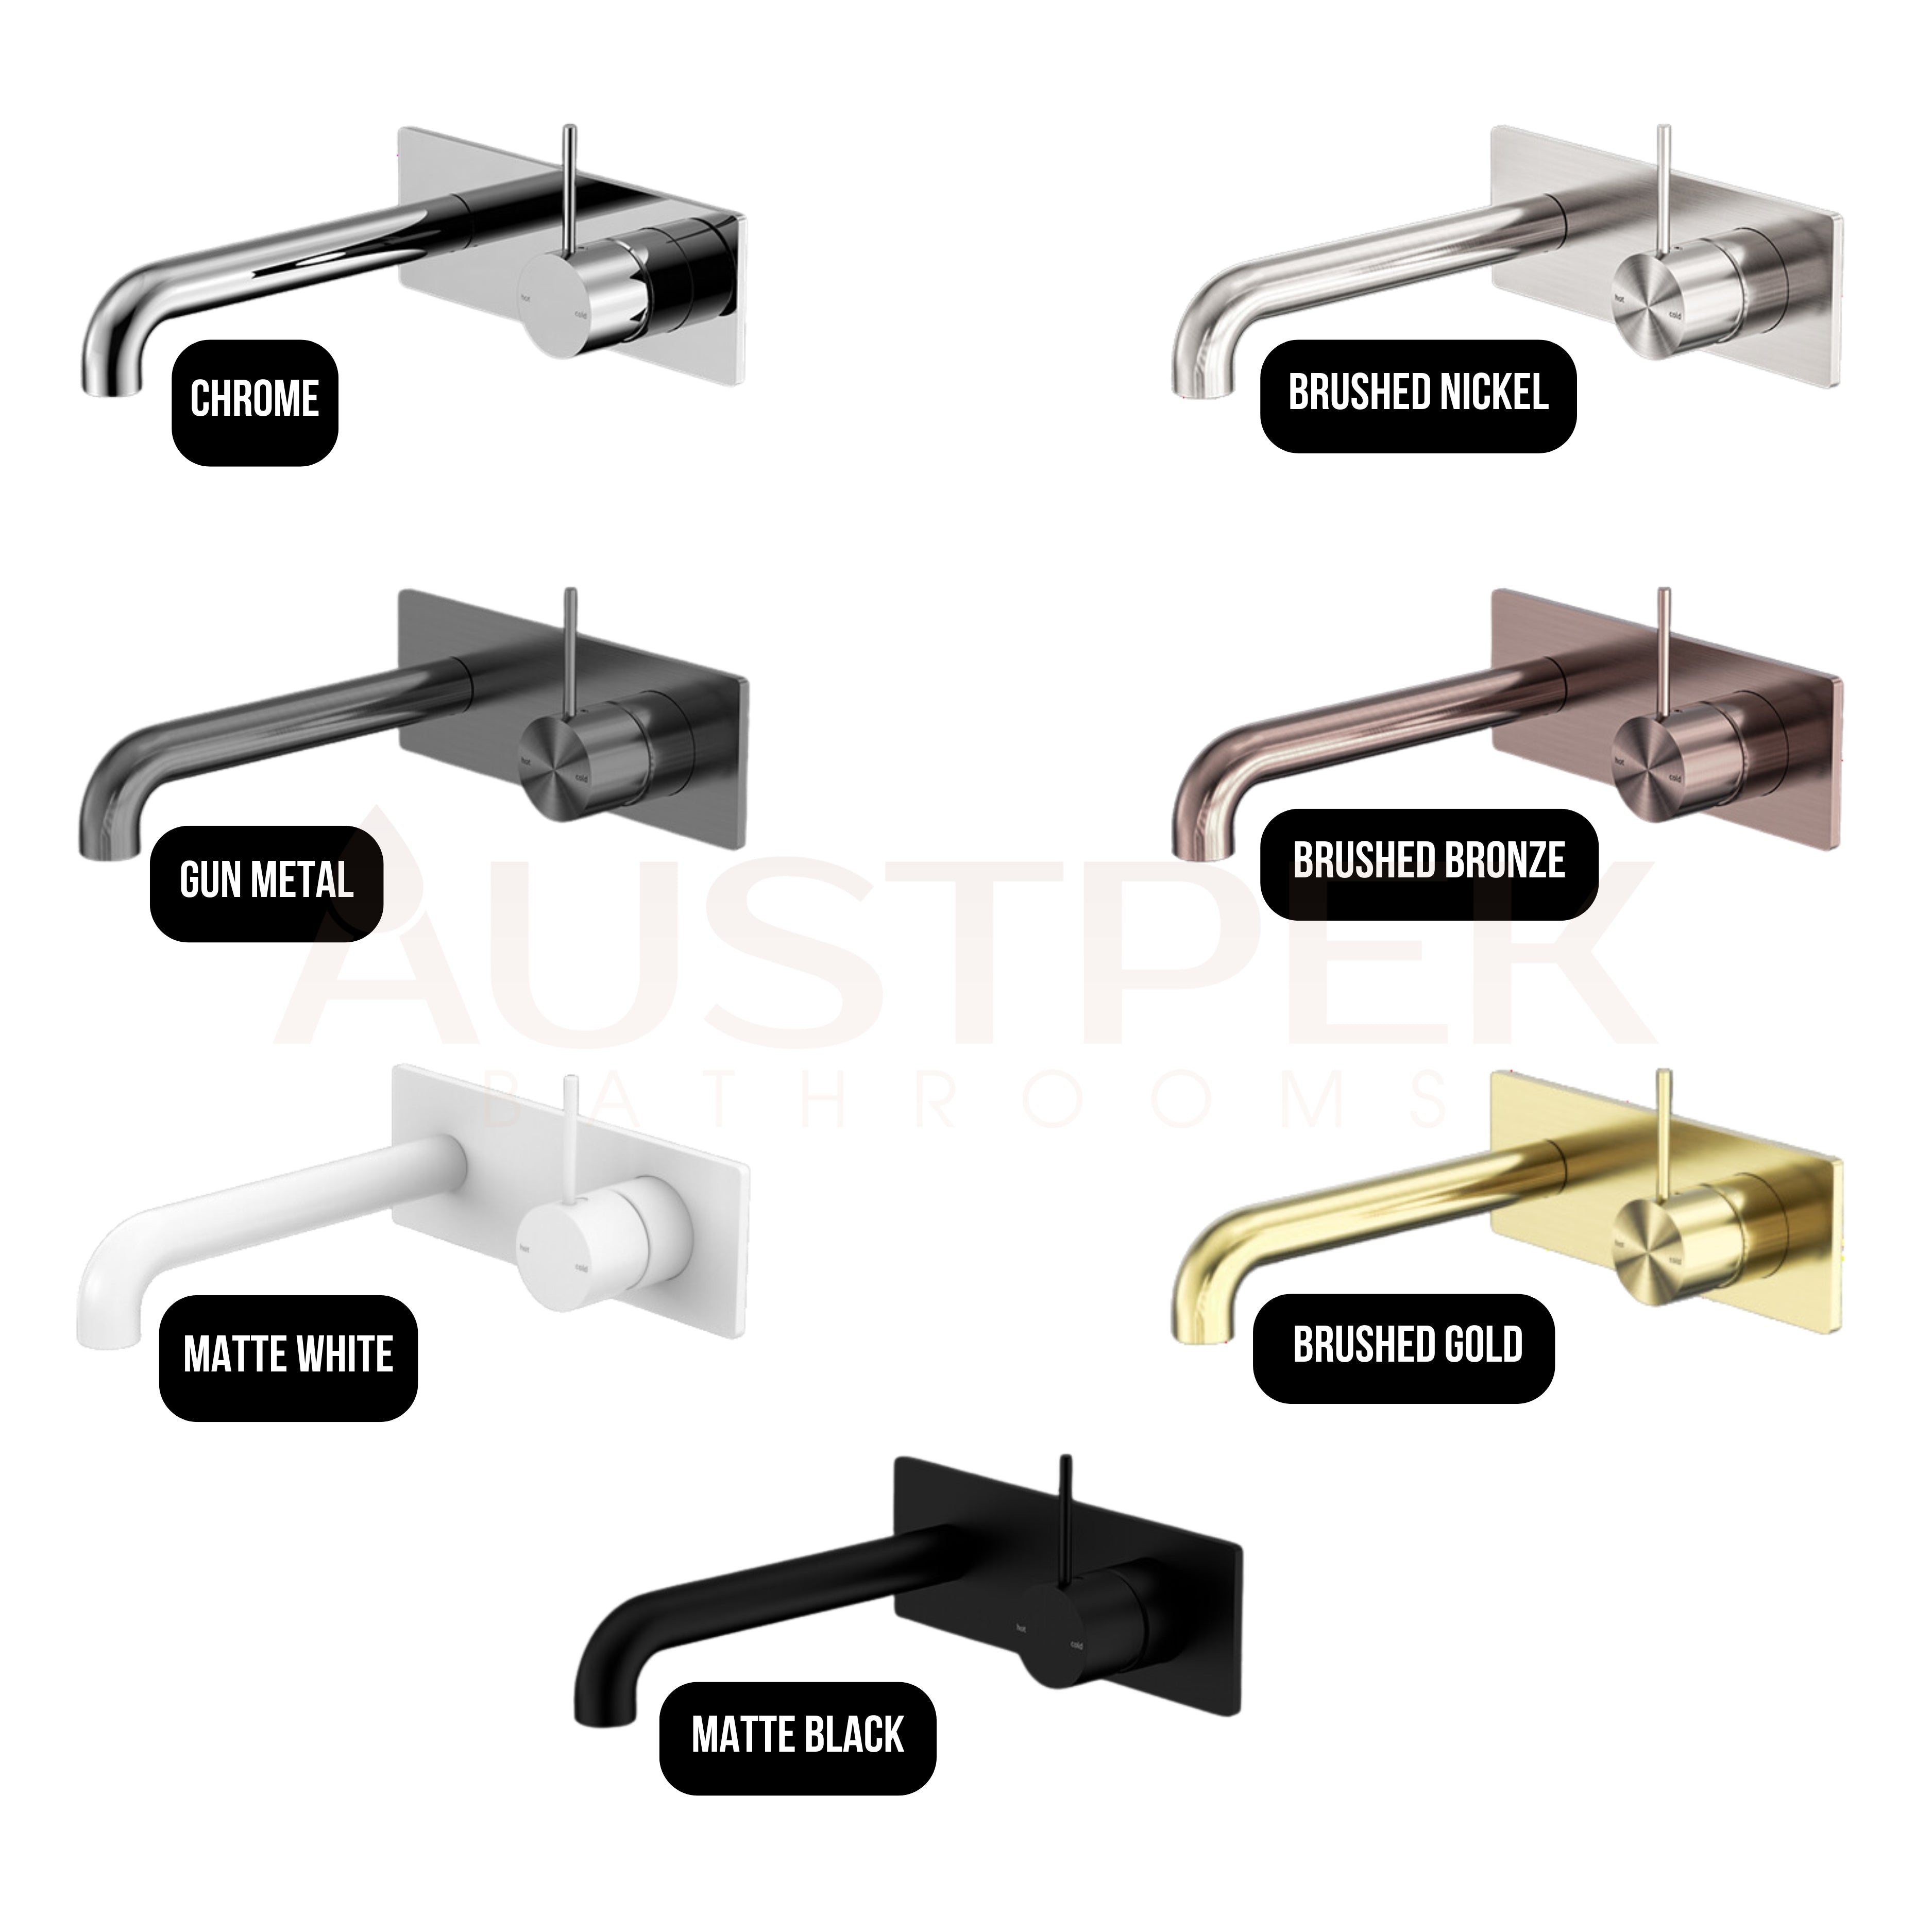 NERO MECCA WALL BASIN/BATH MIXER HANDLE UP CHROME  (AVAILABLE IN 120MM,160MM,185MM, 230MM AND 260MM)